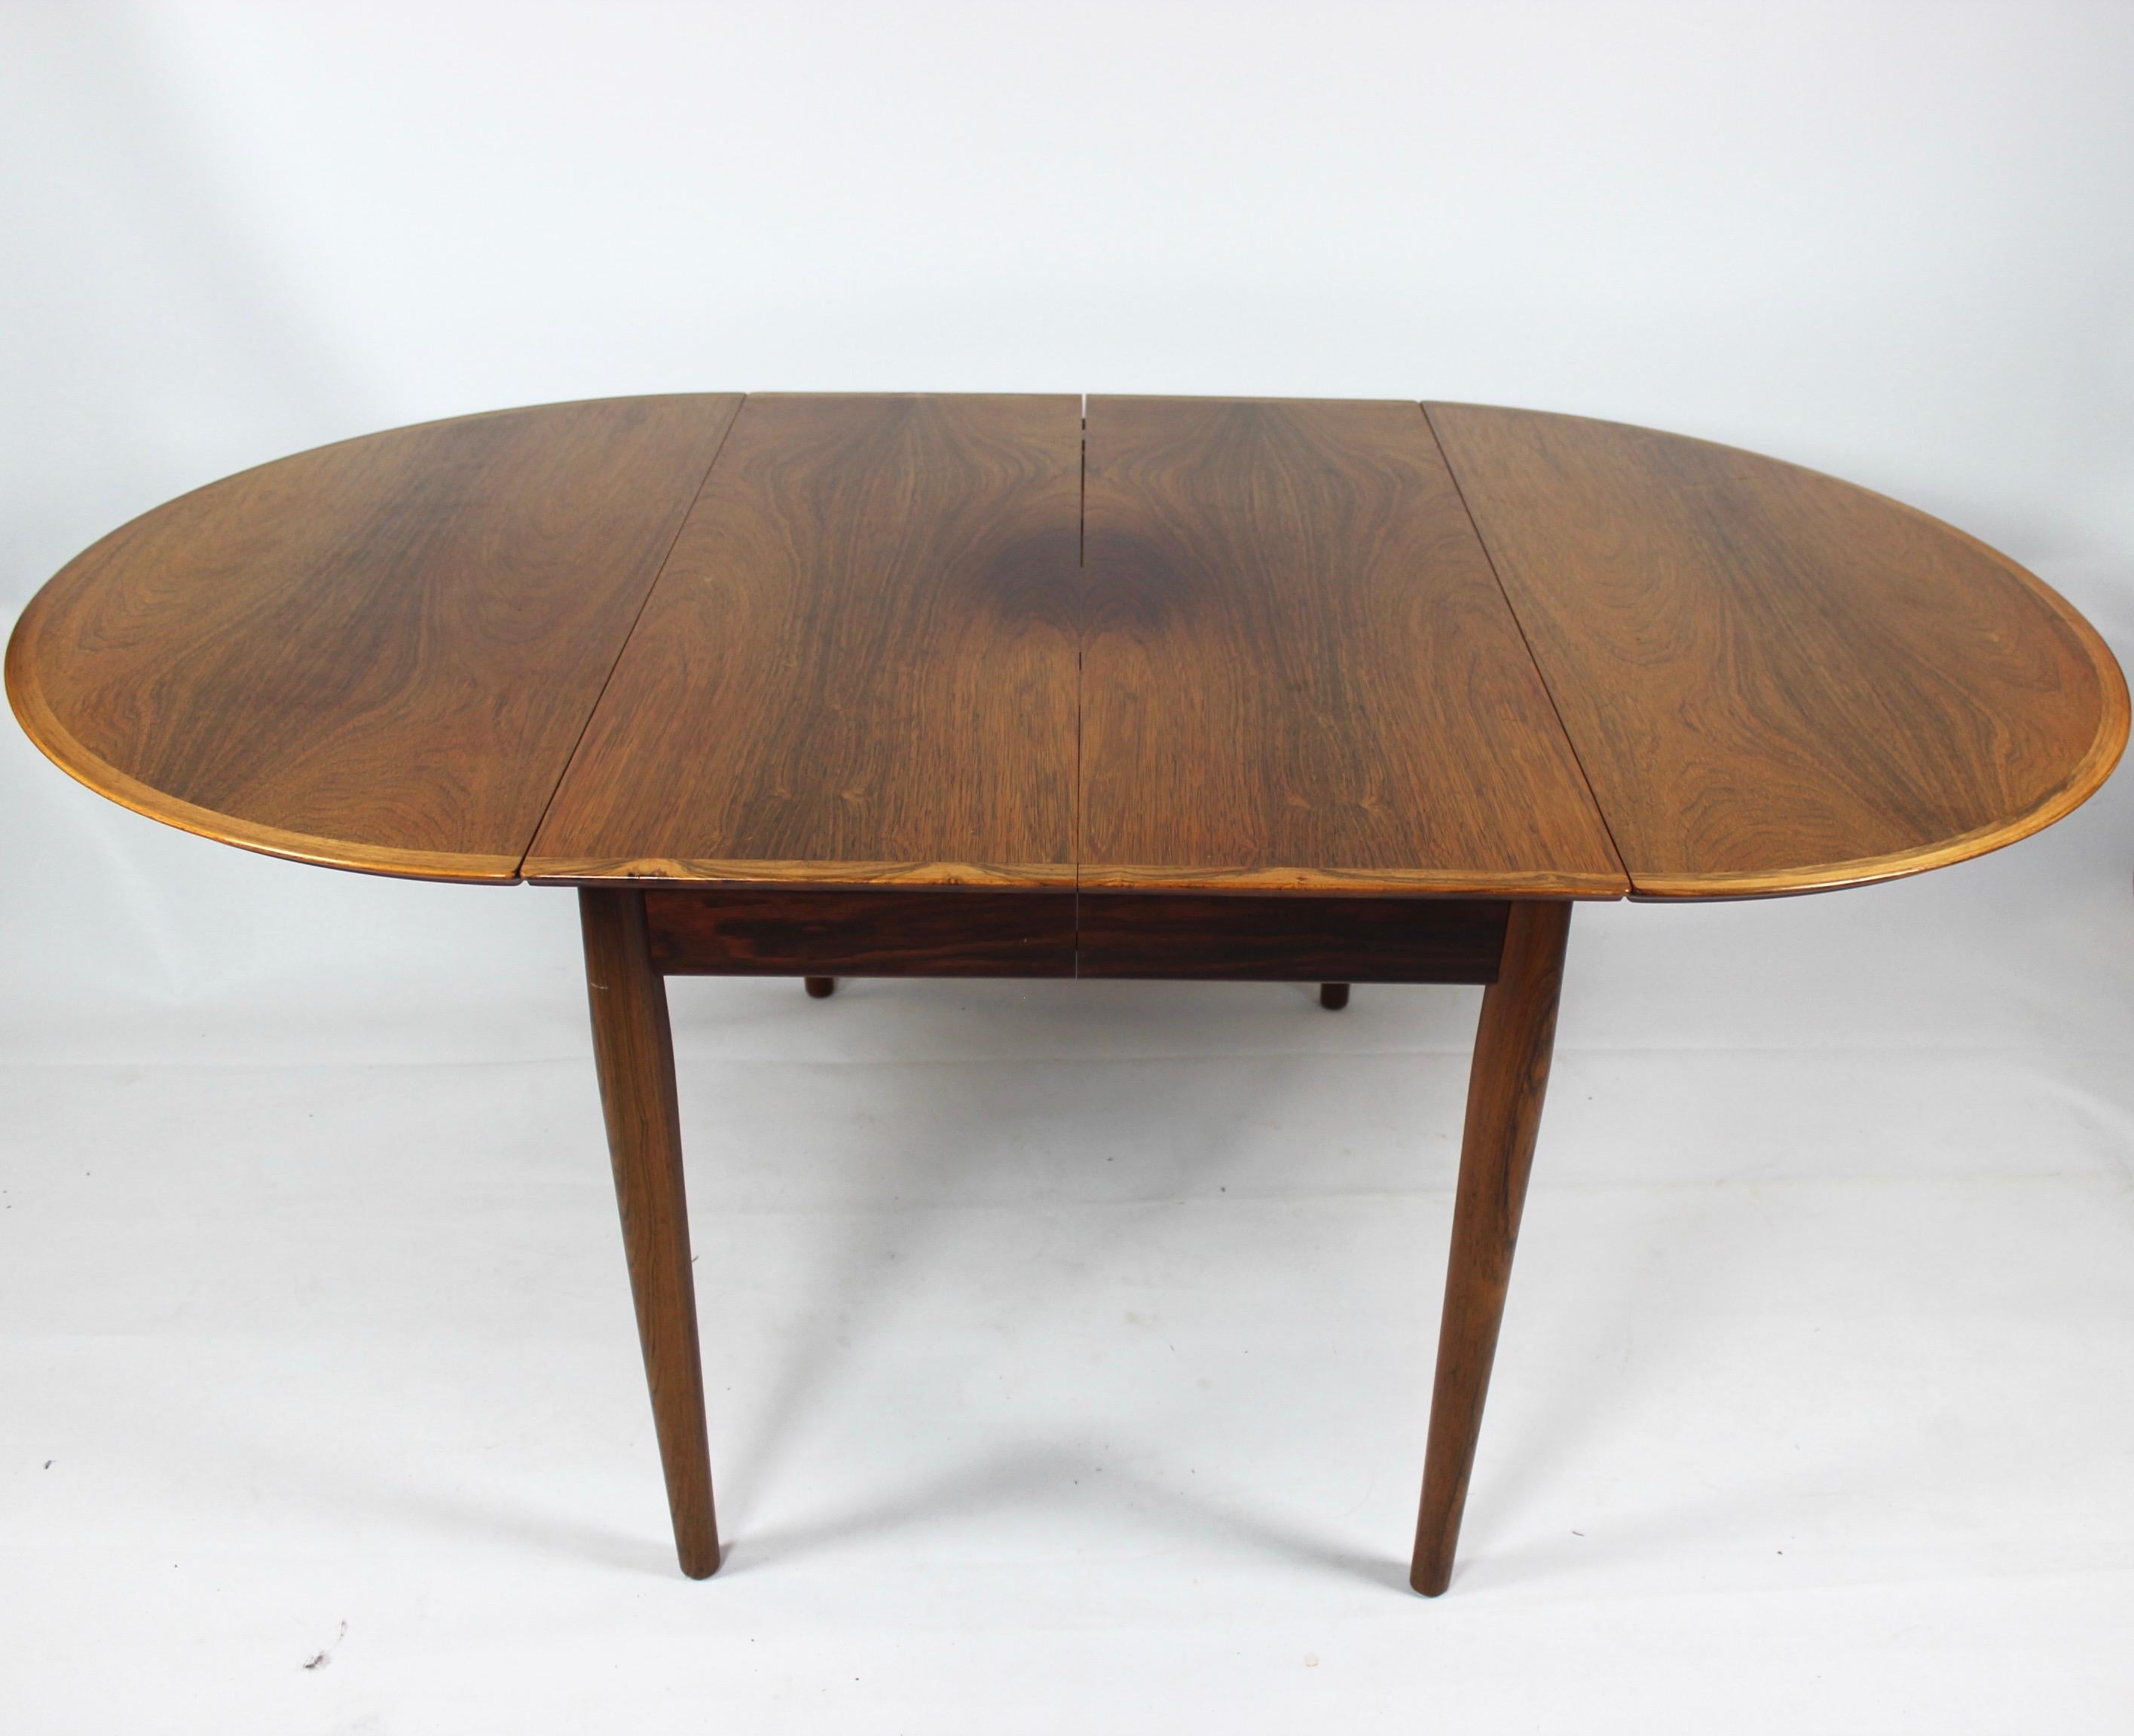 Discover the timeless elegance of this exquisite dining table crafted by Arne Vodder during the 1960s. Fashioned from rich rosewood, this piece exudes sophistication and practicality, boasting an impeccable design that transcends eras.

The hallmark